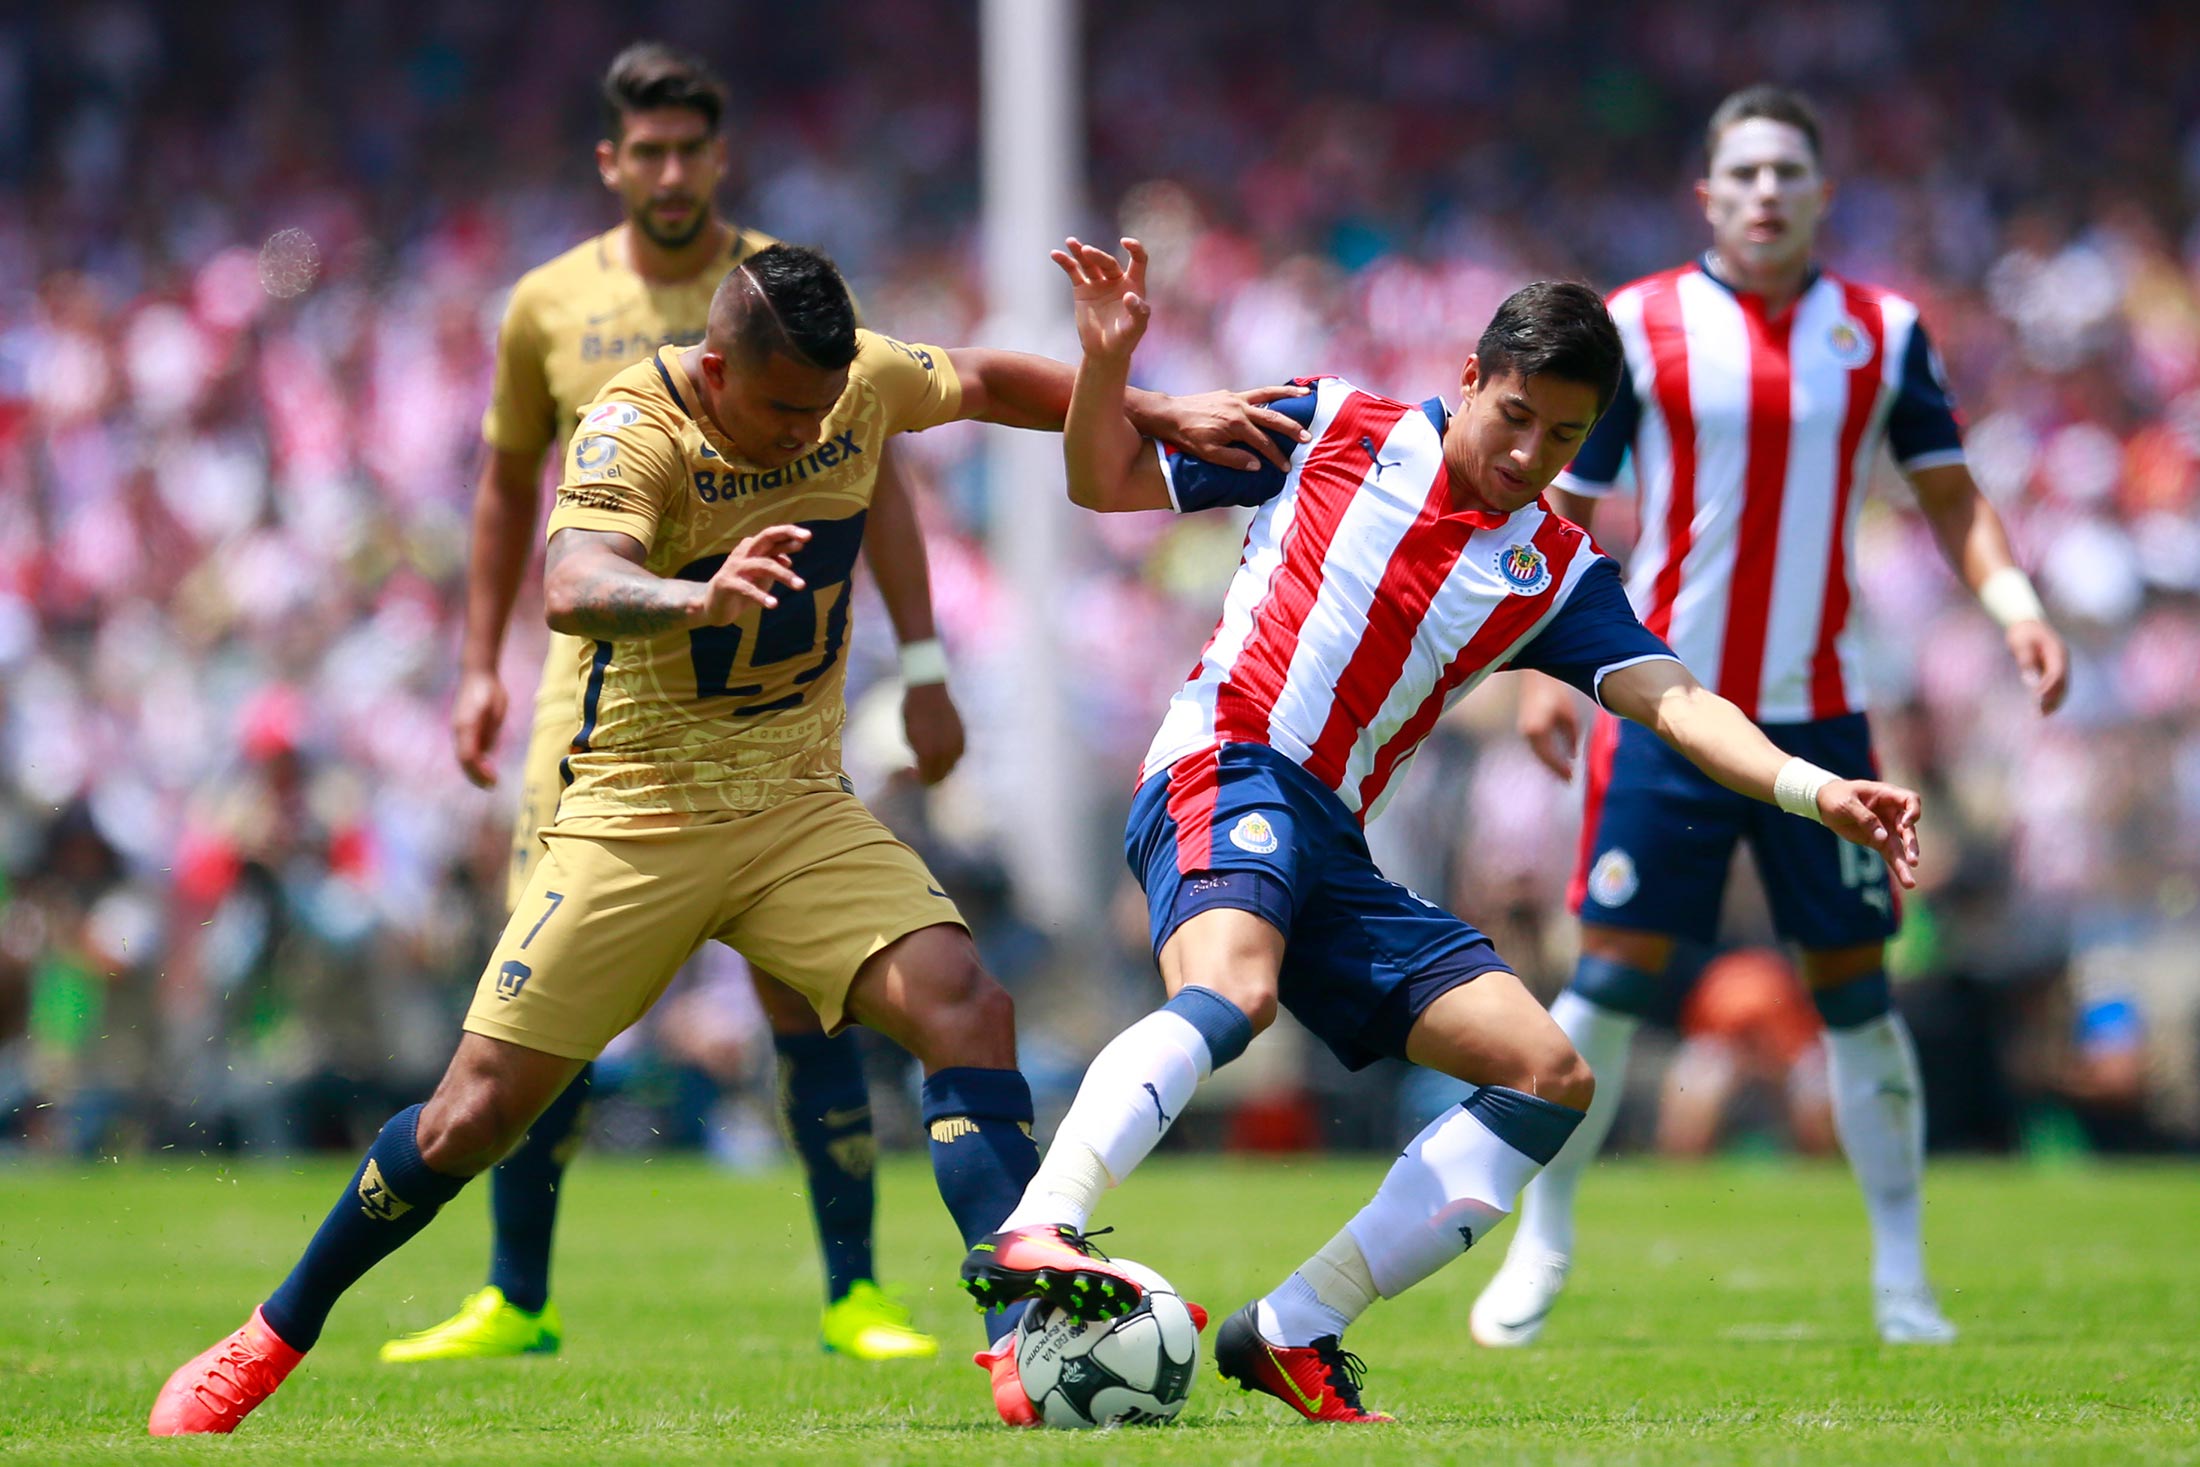 Javier Cortes of Pumas fights for the ball with Carlos Cisneros of Chivas during the 1st round match between Pumas UNAM and Chivas as part of the Torneo Apertura 2016 Liga MX at Olimpico Universitario Stadium on July 17, 2016 in Mexico City, Mexico.
